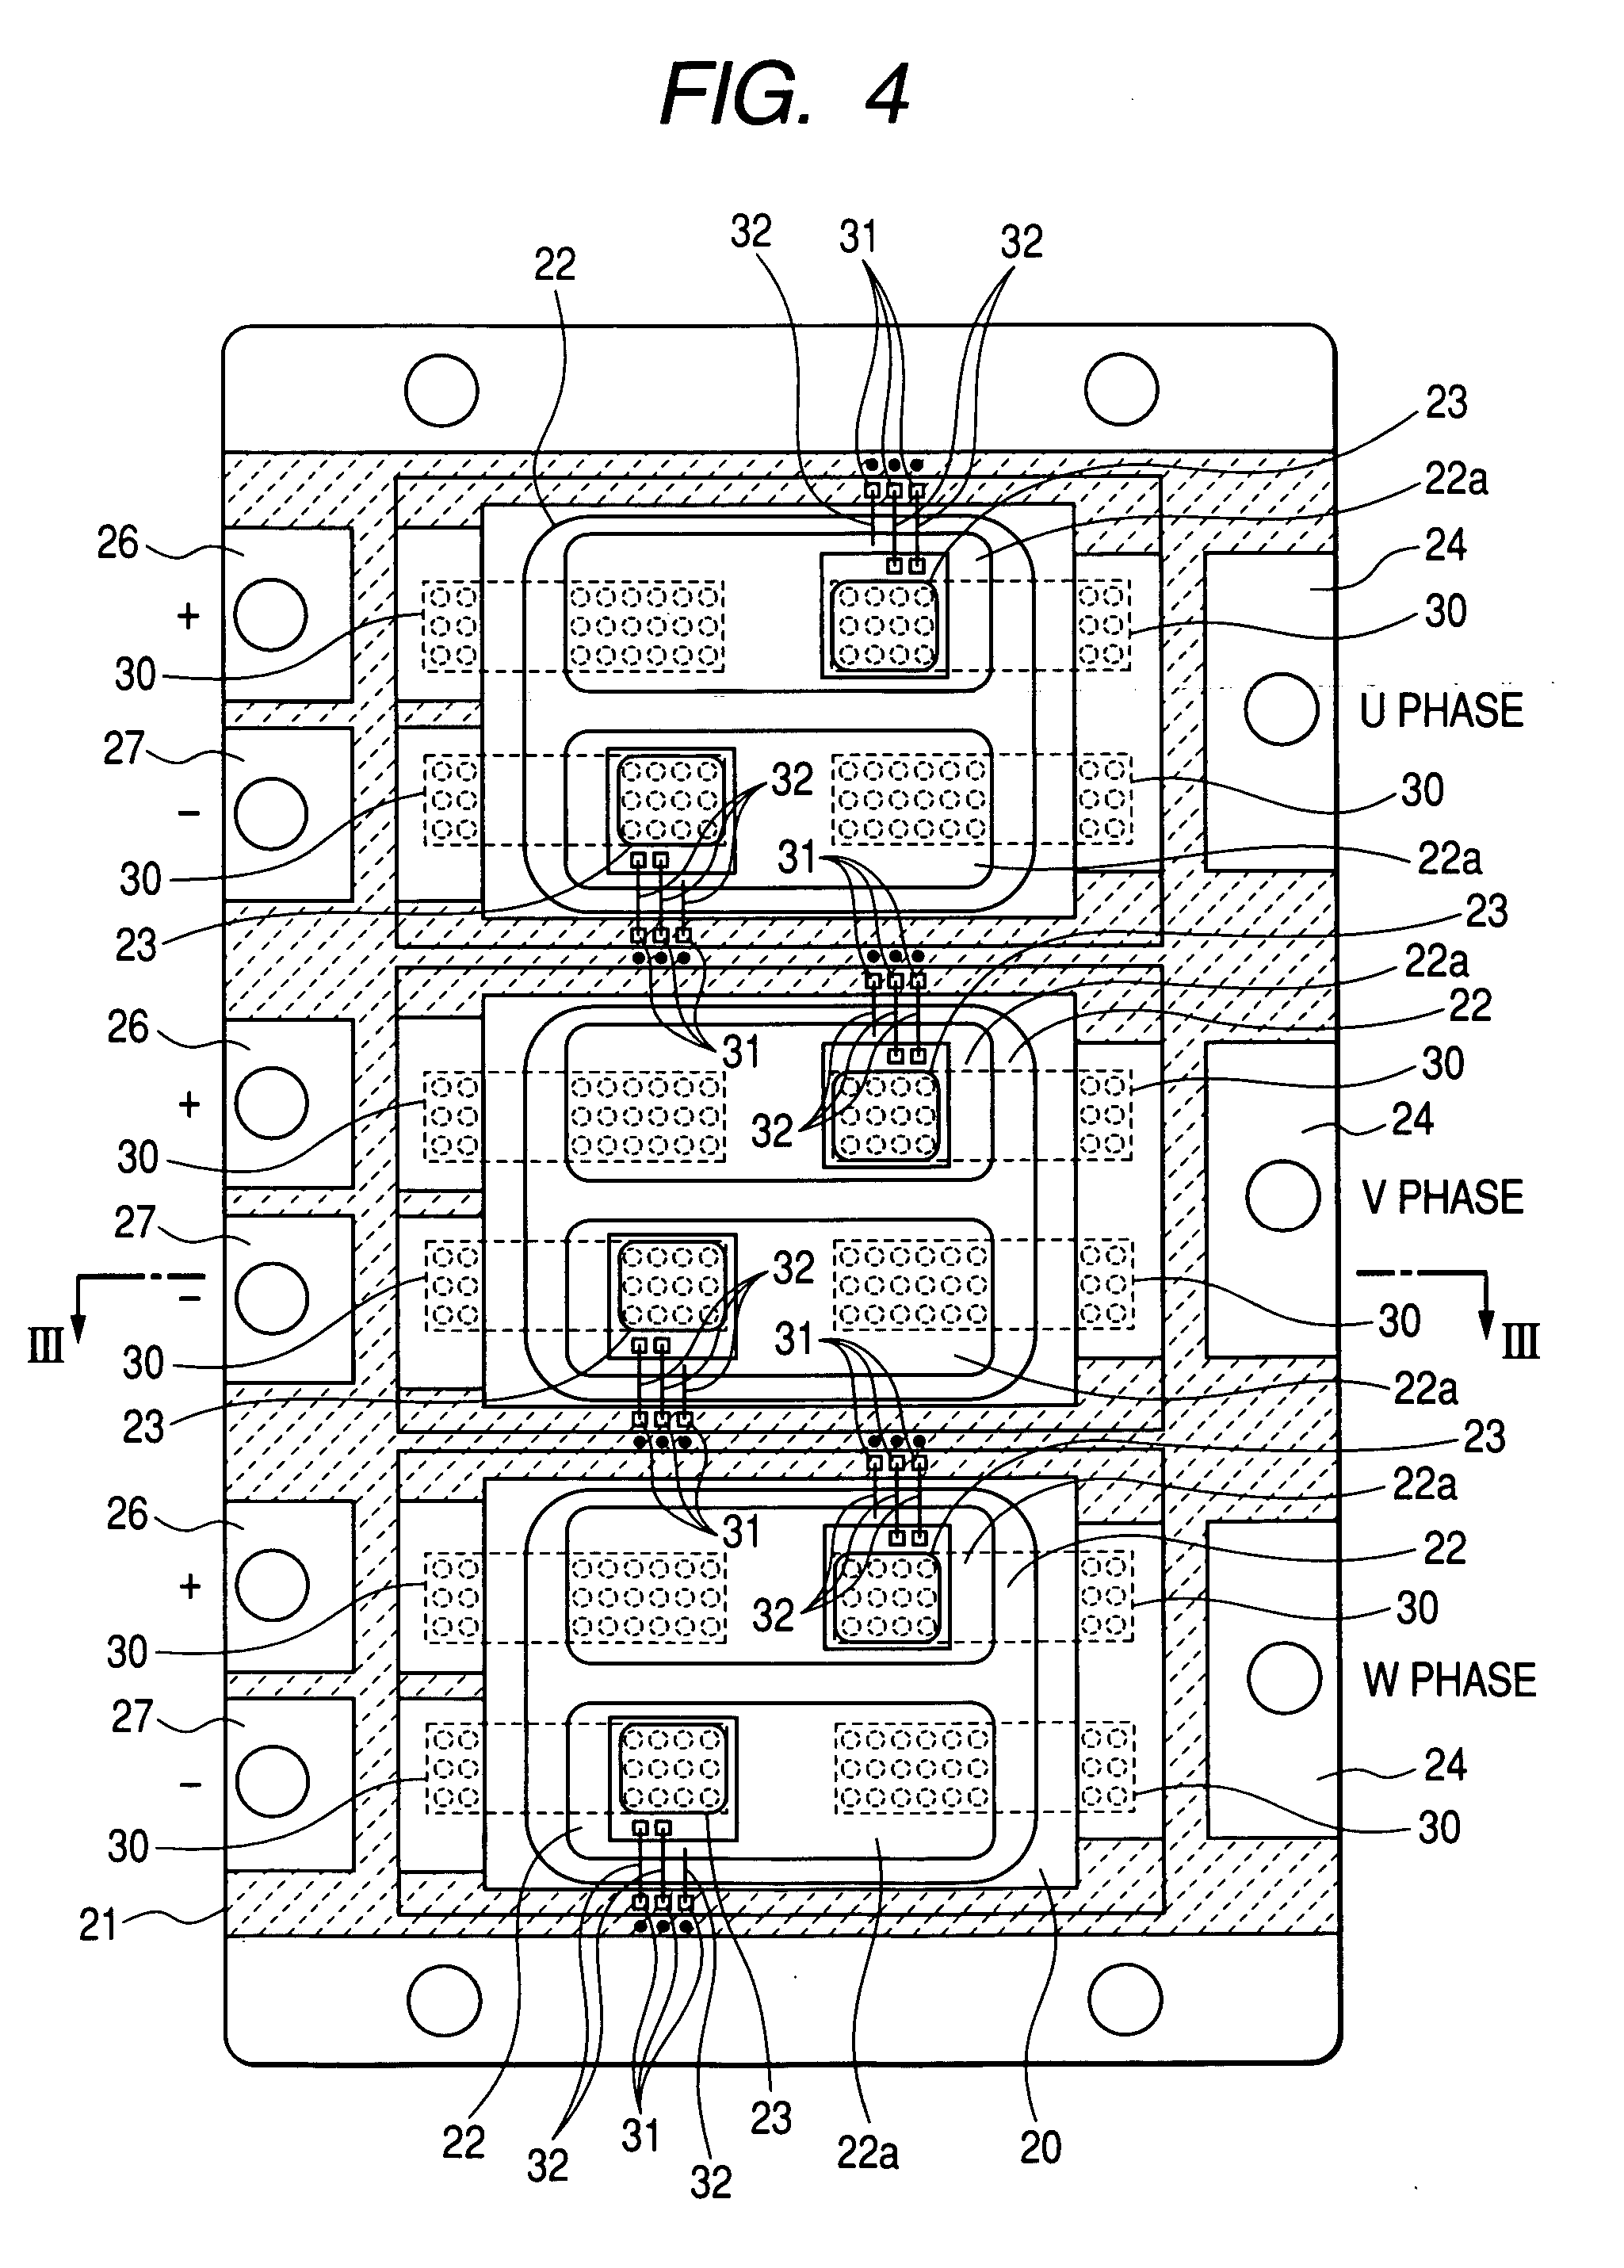 Electrically conductive adhesive sheet, method of manufacturing the same, and electric power conversion equipment